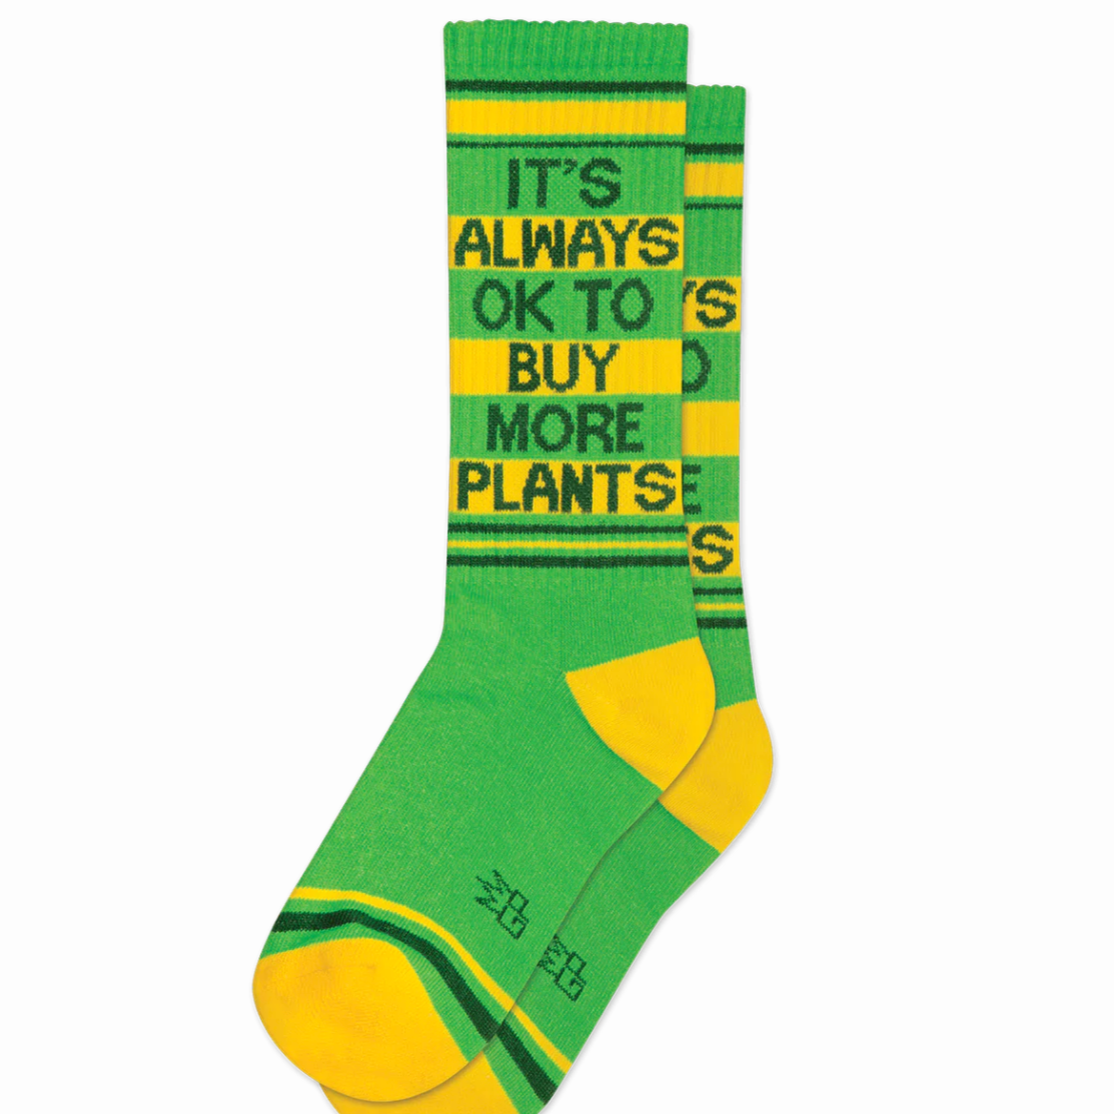 It's Always OK to Buy More Plants Gym Socks x Gumball Poodle